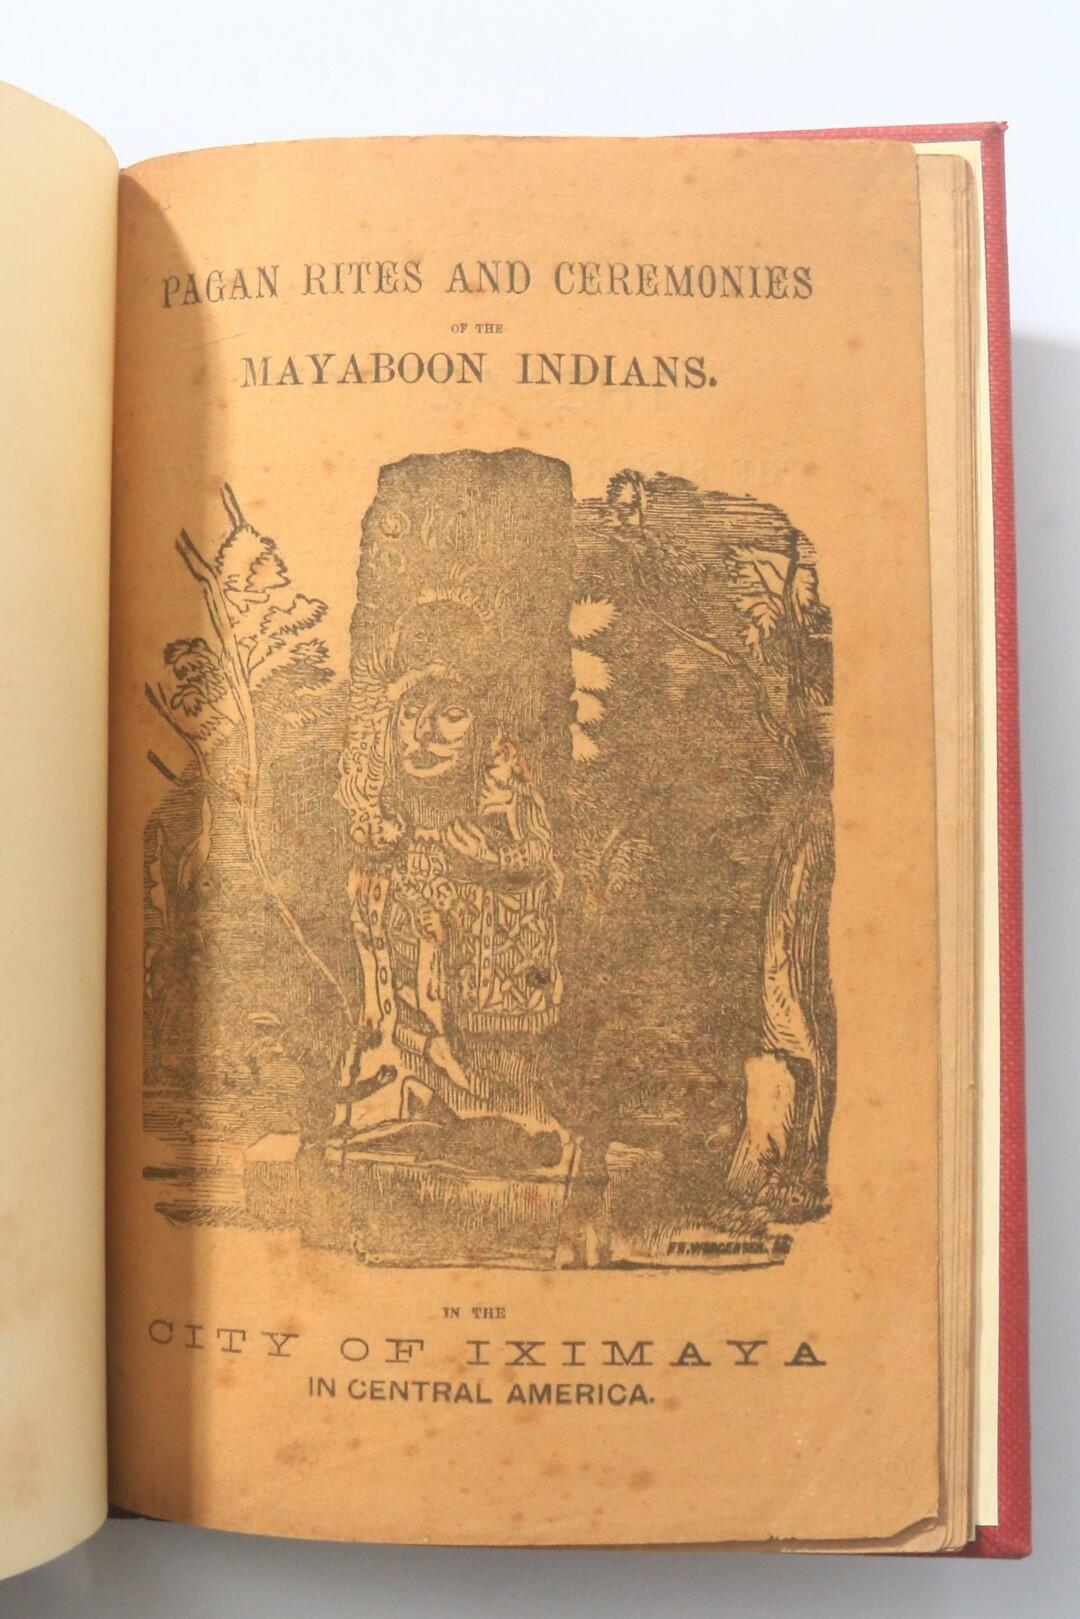 Anonymous [John L Stephens and Pedro Velazquez] - Pagan Rites and Ceremonies of the Mayaboon Indians in the City of Iximaya in Central America [aka] Memoir of an Eventful Expedition into Central America; Resulting in the Discovery of the Idolatrous City of Iximaya, in an Unexplored Region; and the Possession of Two Remarkable Aztec Children, Maximo (The Man) and Bartola (The Girl) Descendants and Specimens of the Sacerdotal Cast (Now Nearly Extinct), of the Ancient Aztec Founders of the Ruined Temples of that Country - No Publisher, nd [1860s?], First Edition.